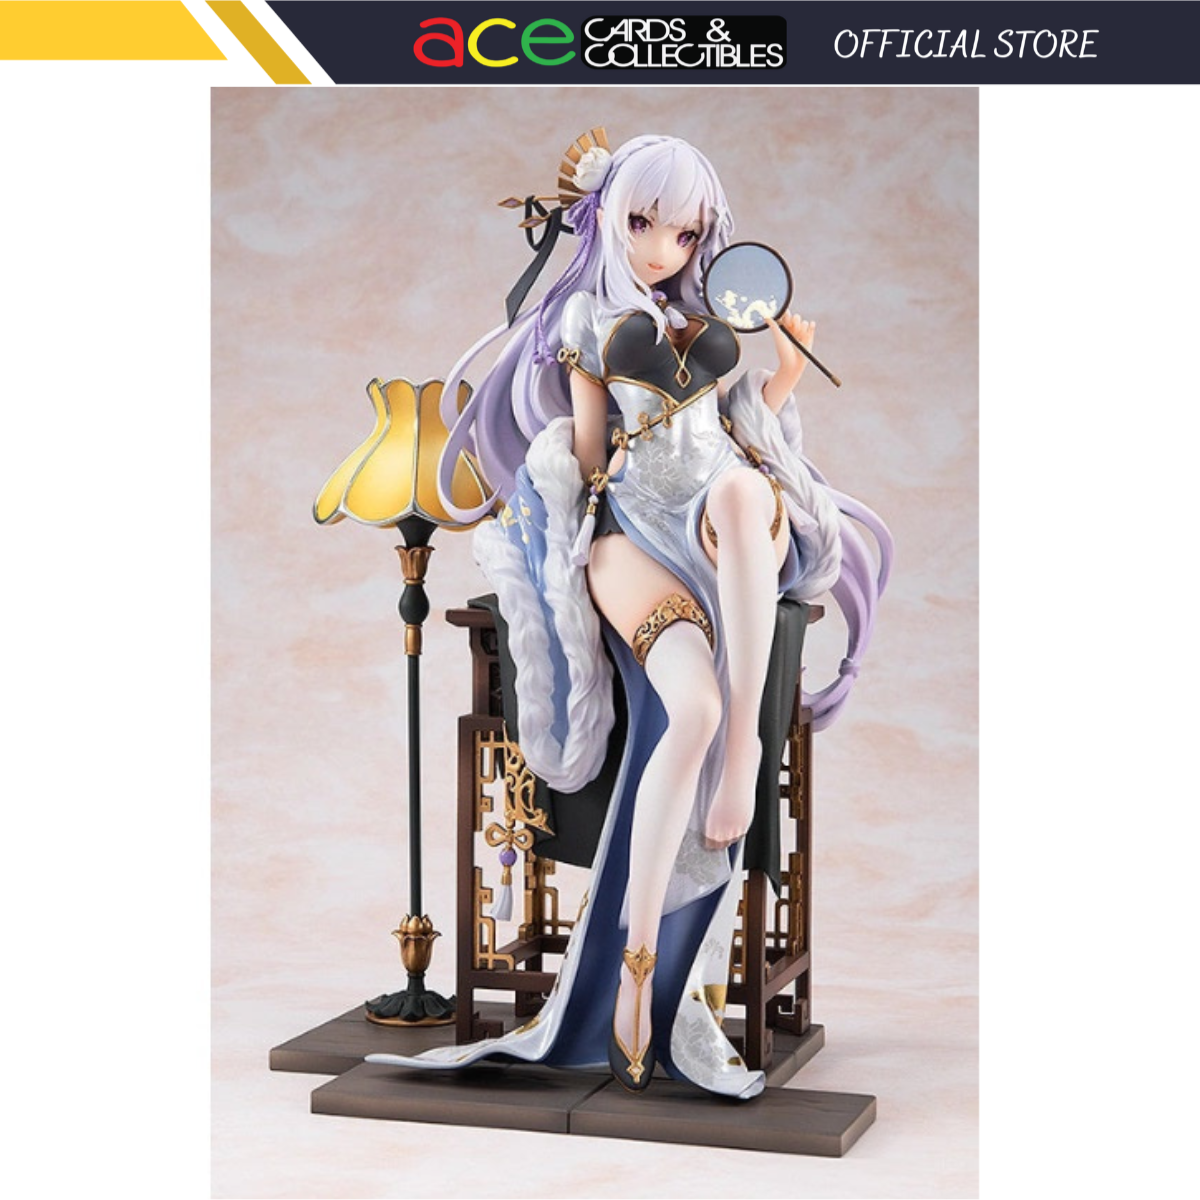 Re:Zero − Starting Life in Another World "Emilia" (Graceful Beauty Ver.)-Kadokawa-Ace Cards & Collectibles